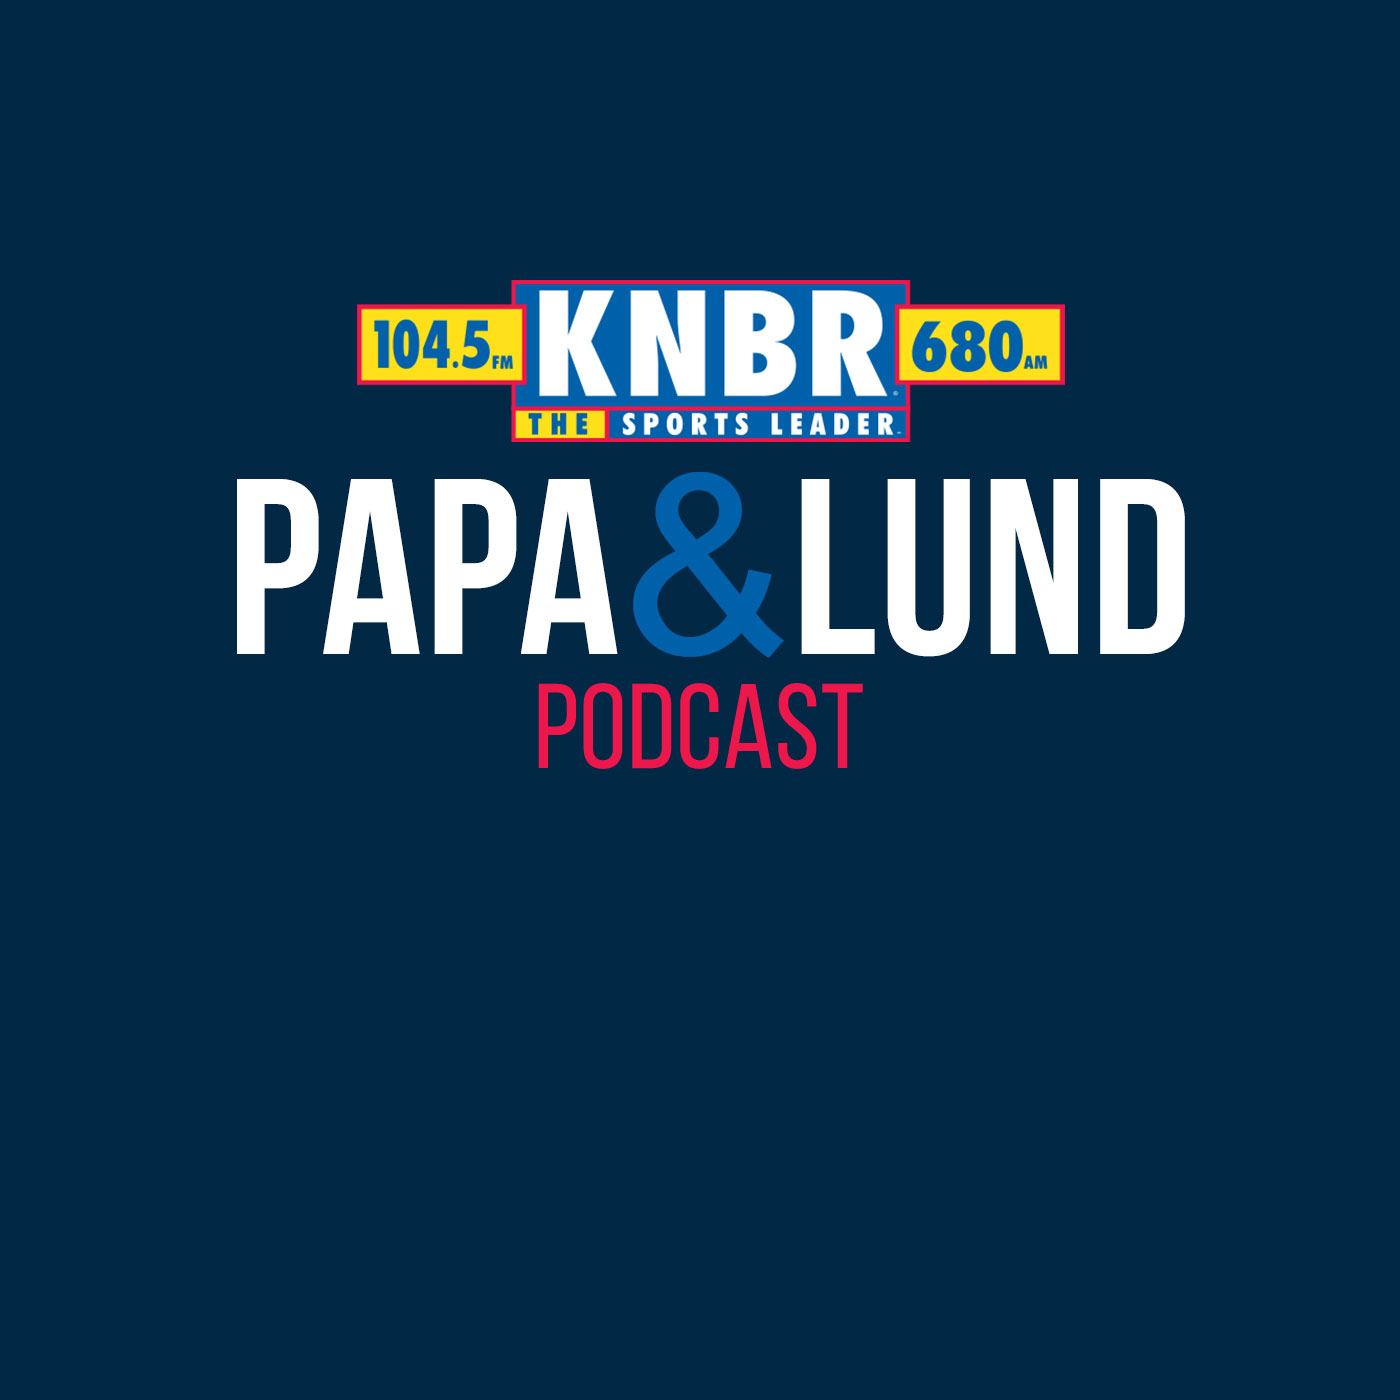 4-17 Jason Anderson joins Papa & Lund to discuss the Kings outstanding performance in Game 1 and how De'Aaron Fox's performance on the defensive side of the ball can dictate this series